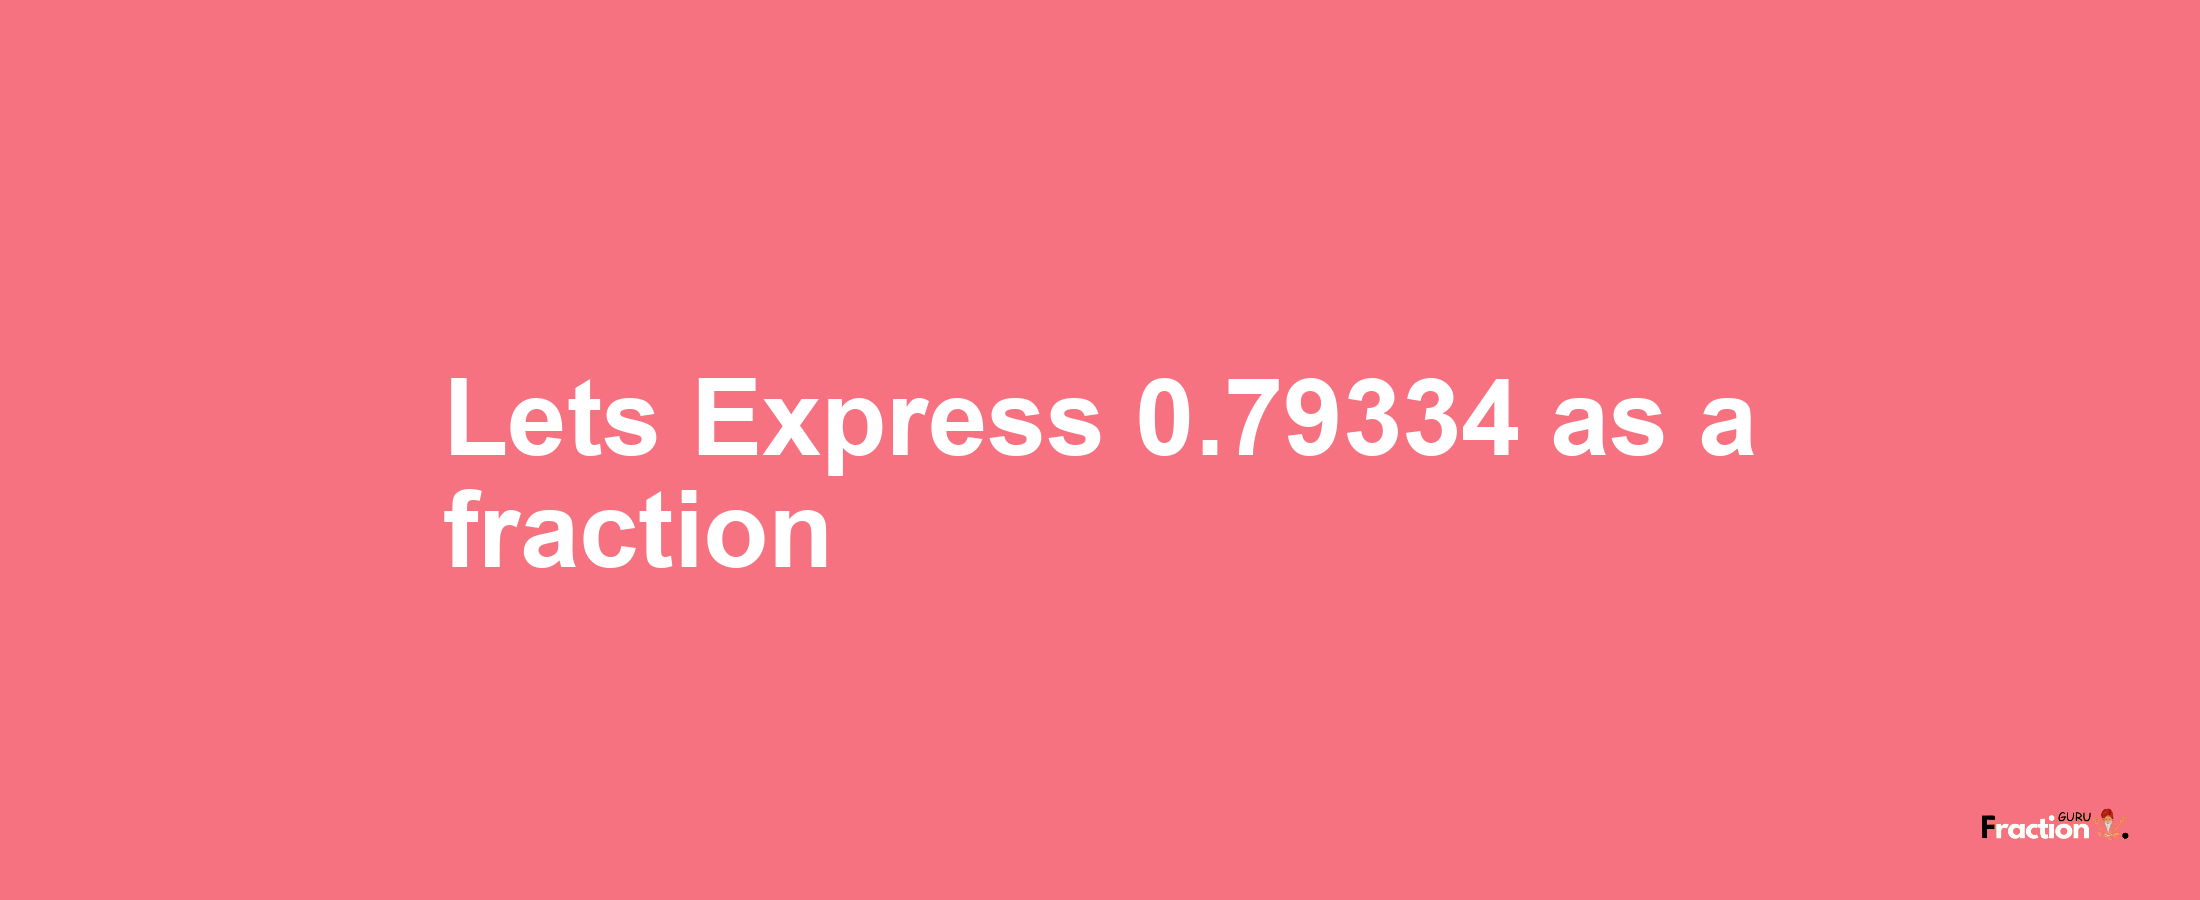 Lets Express 0.79334 as afraction